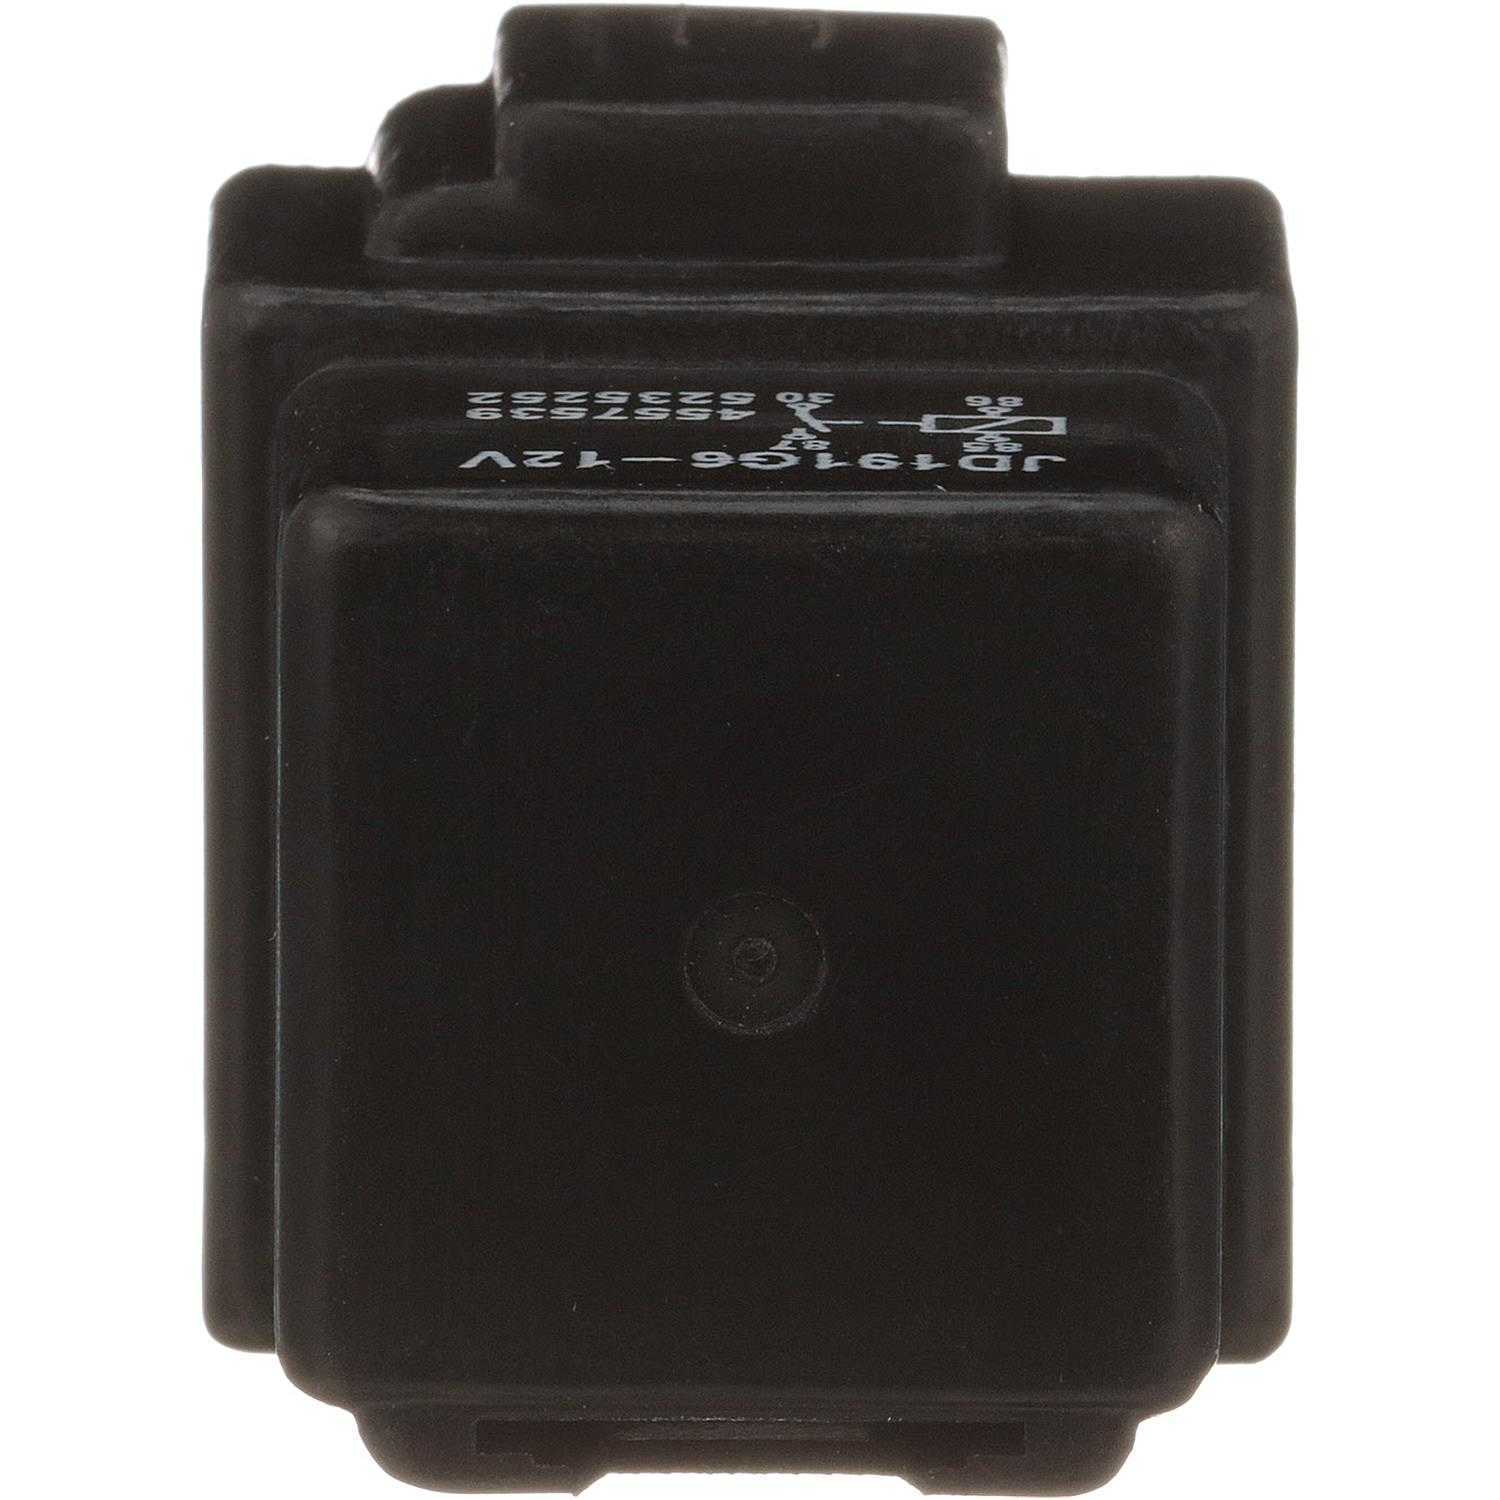 STANDARD MOTOR PRODUCTS - Auto Shut Down Relay - STA RY-608